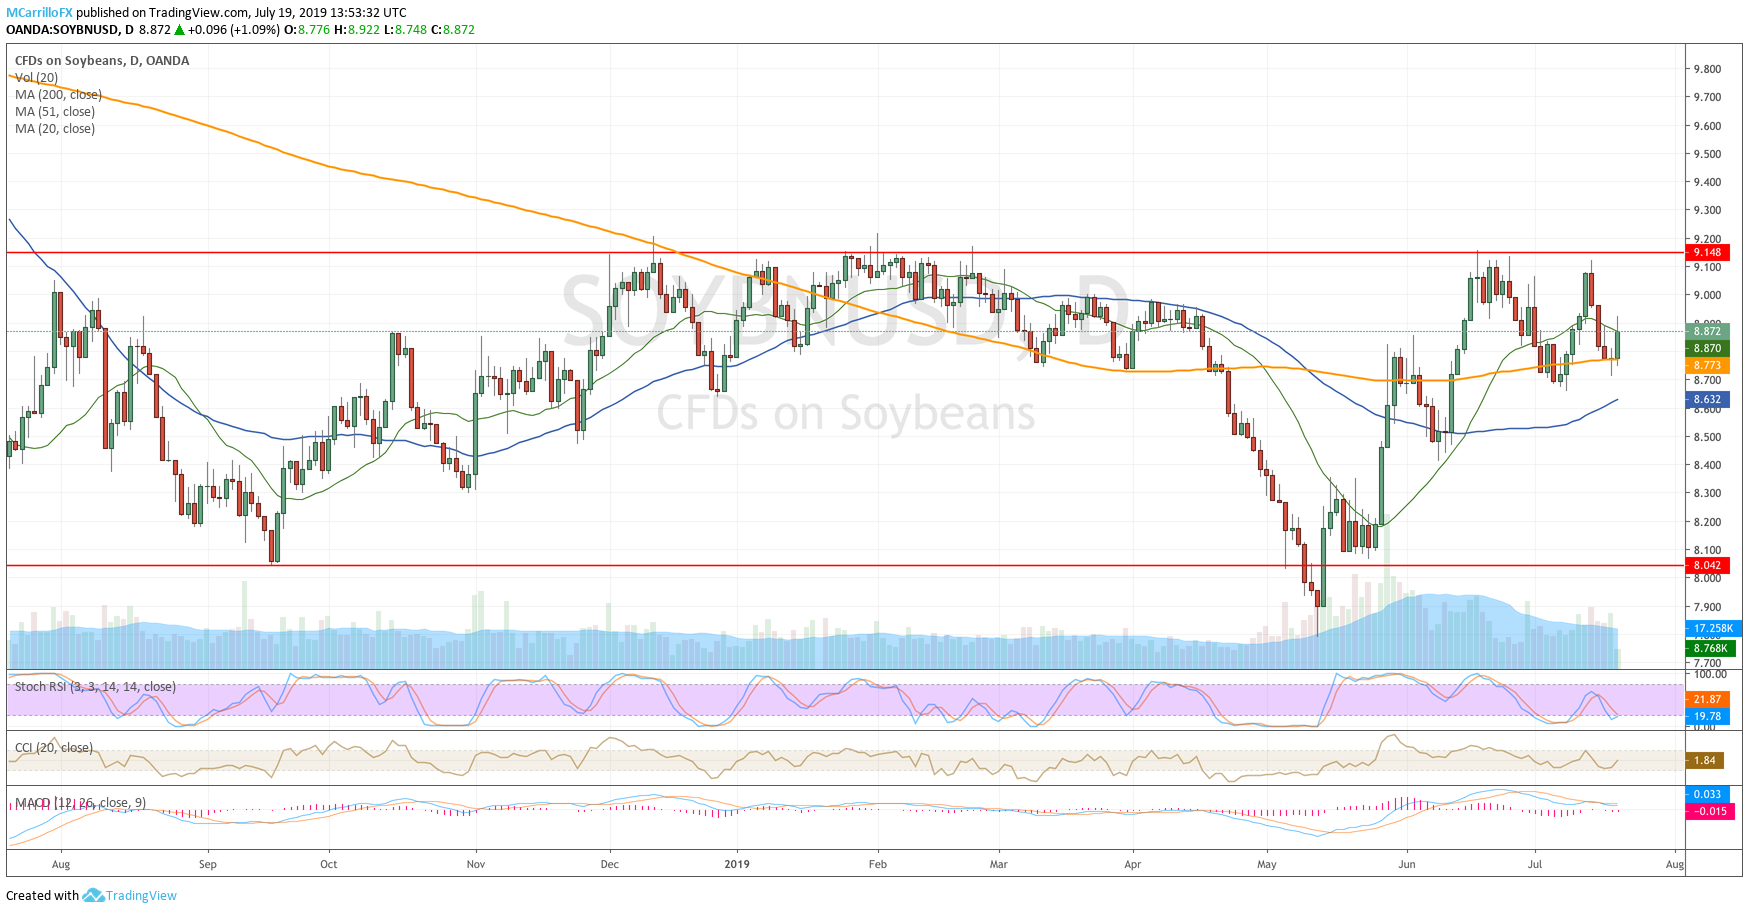 Price of Soybeans daily chart July 19